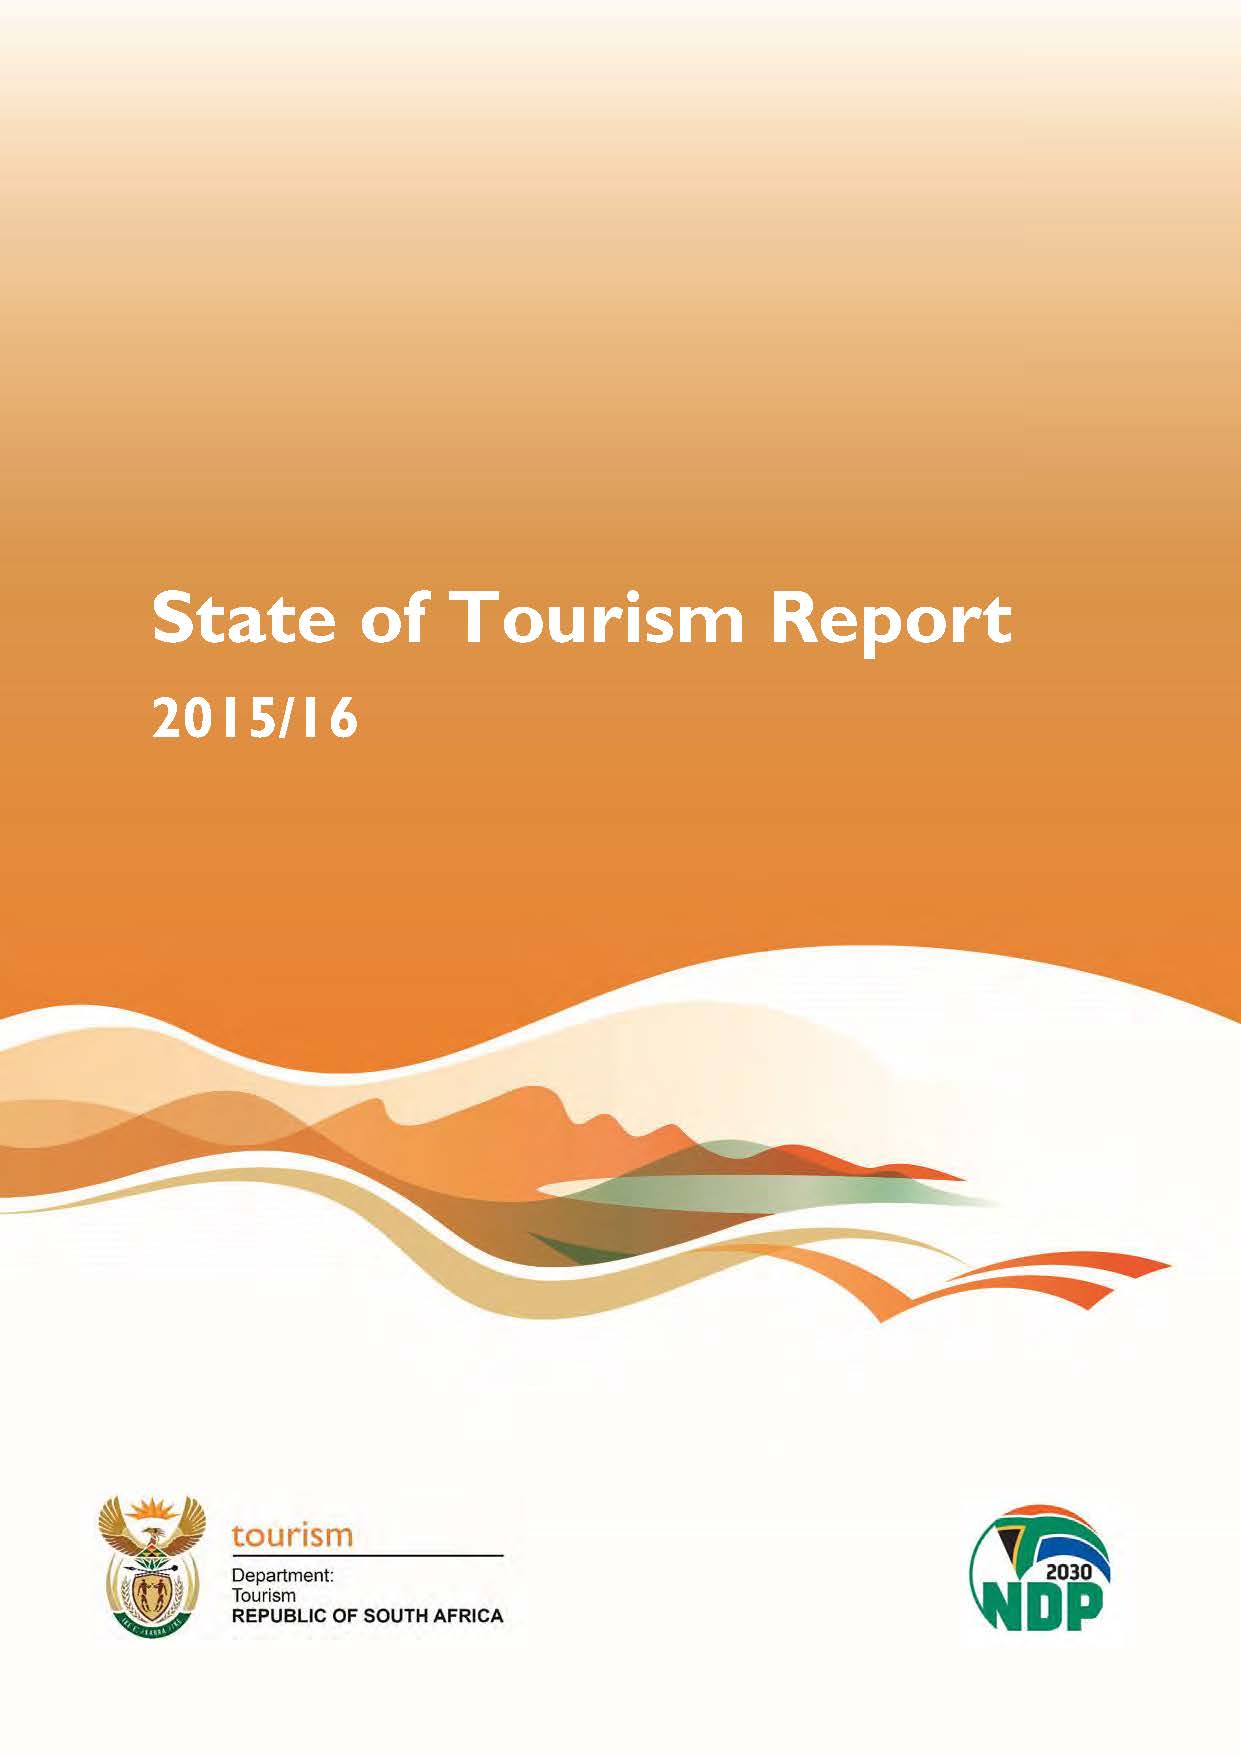 South Africa’s 2015/16 State of Tourism Report